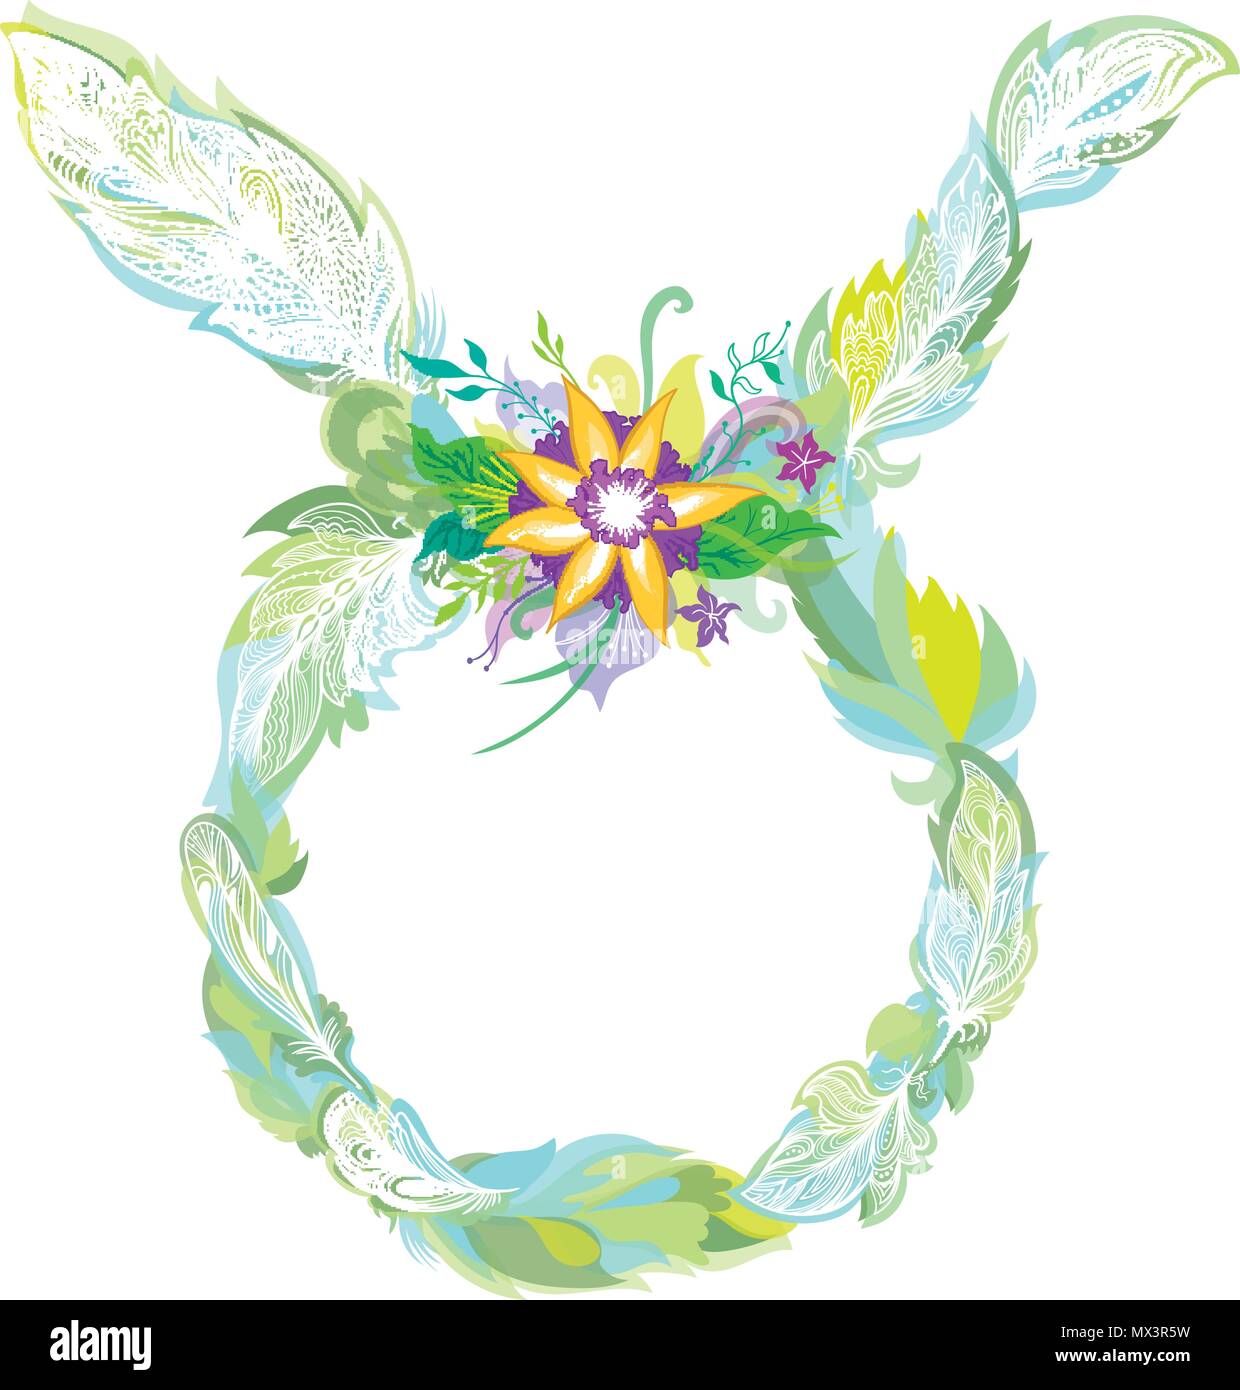 Vector feather boho style astrology symbol with flowers Stock Vector